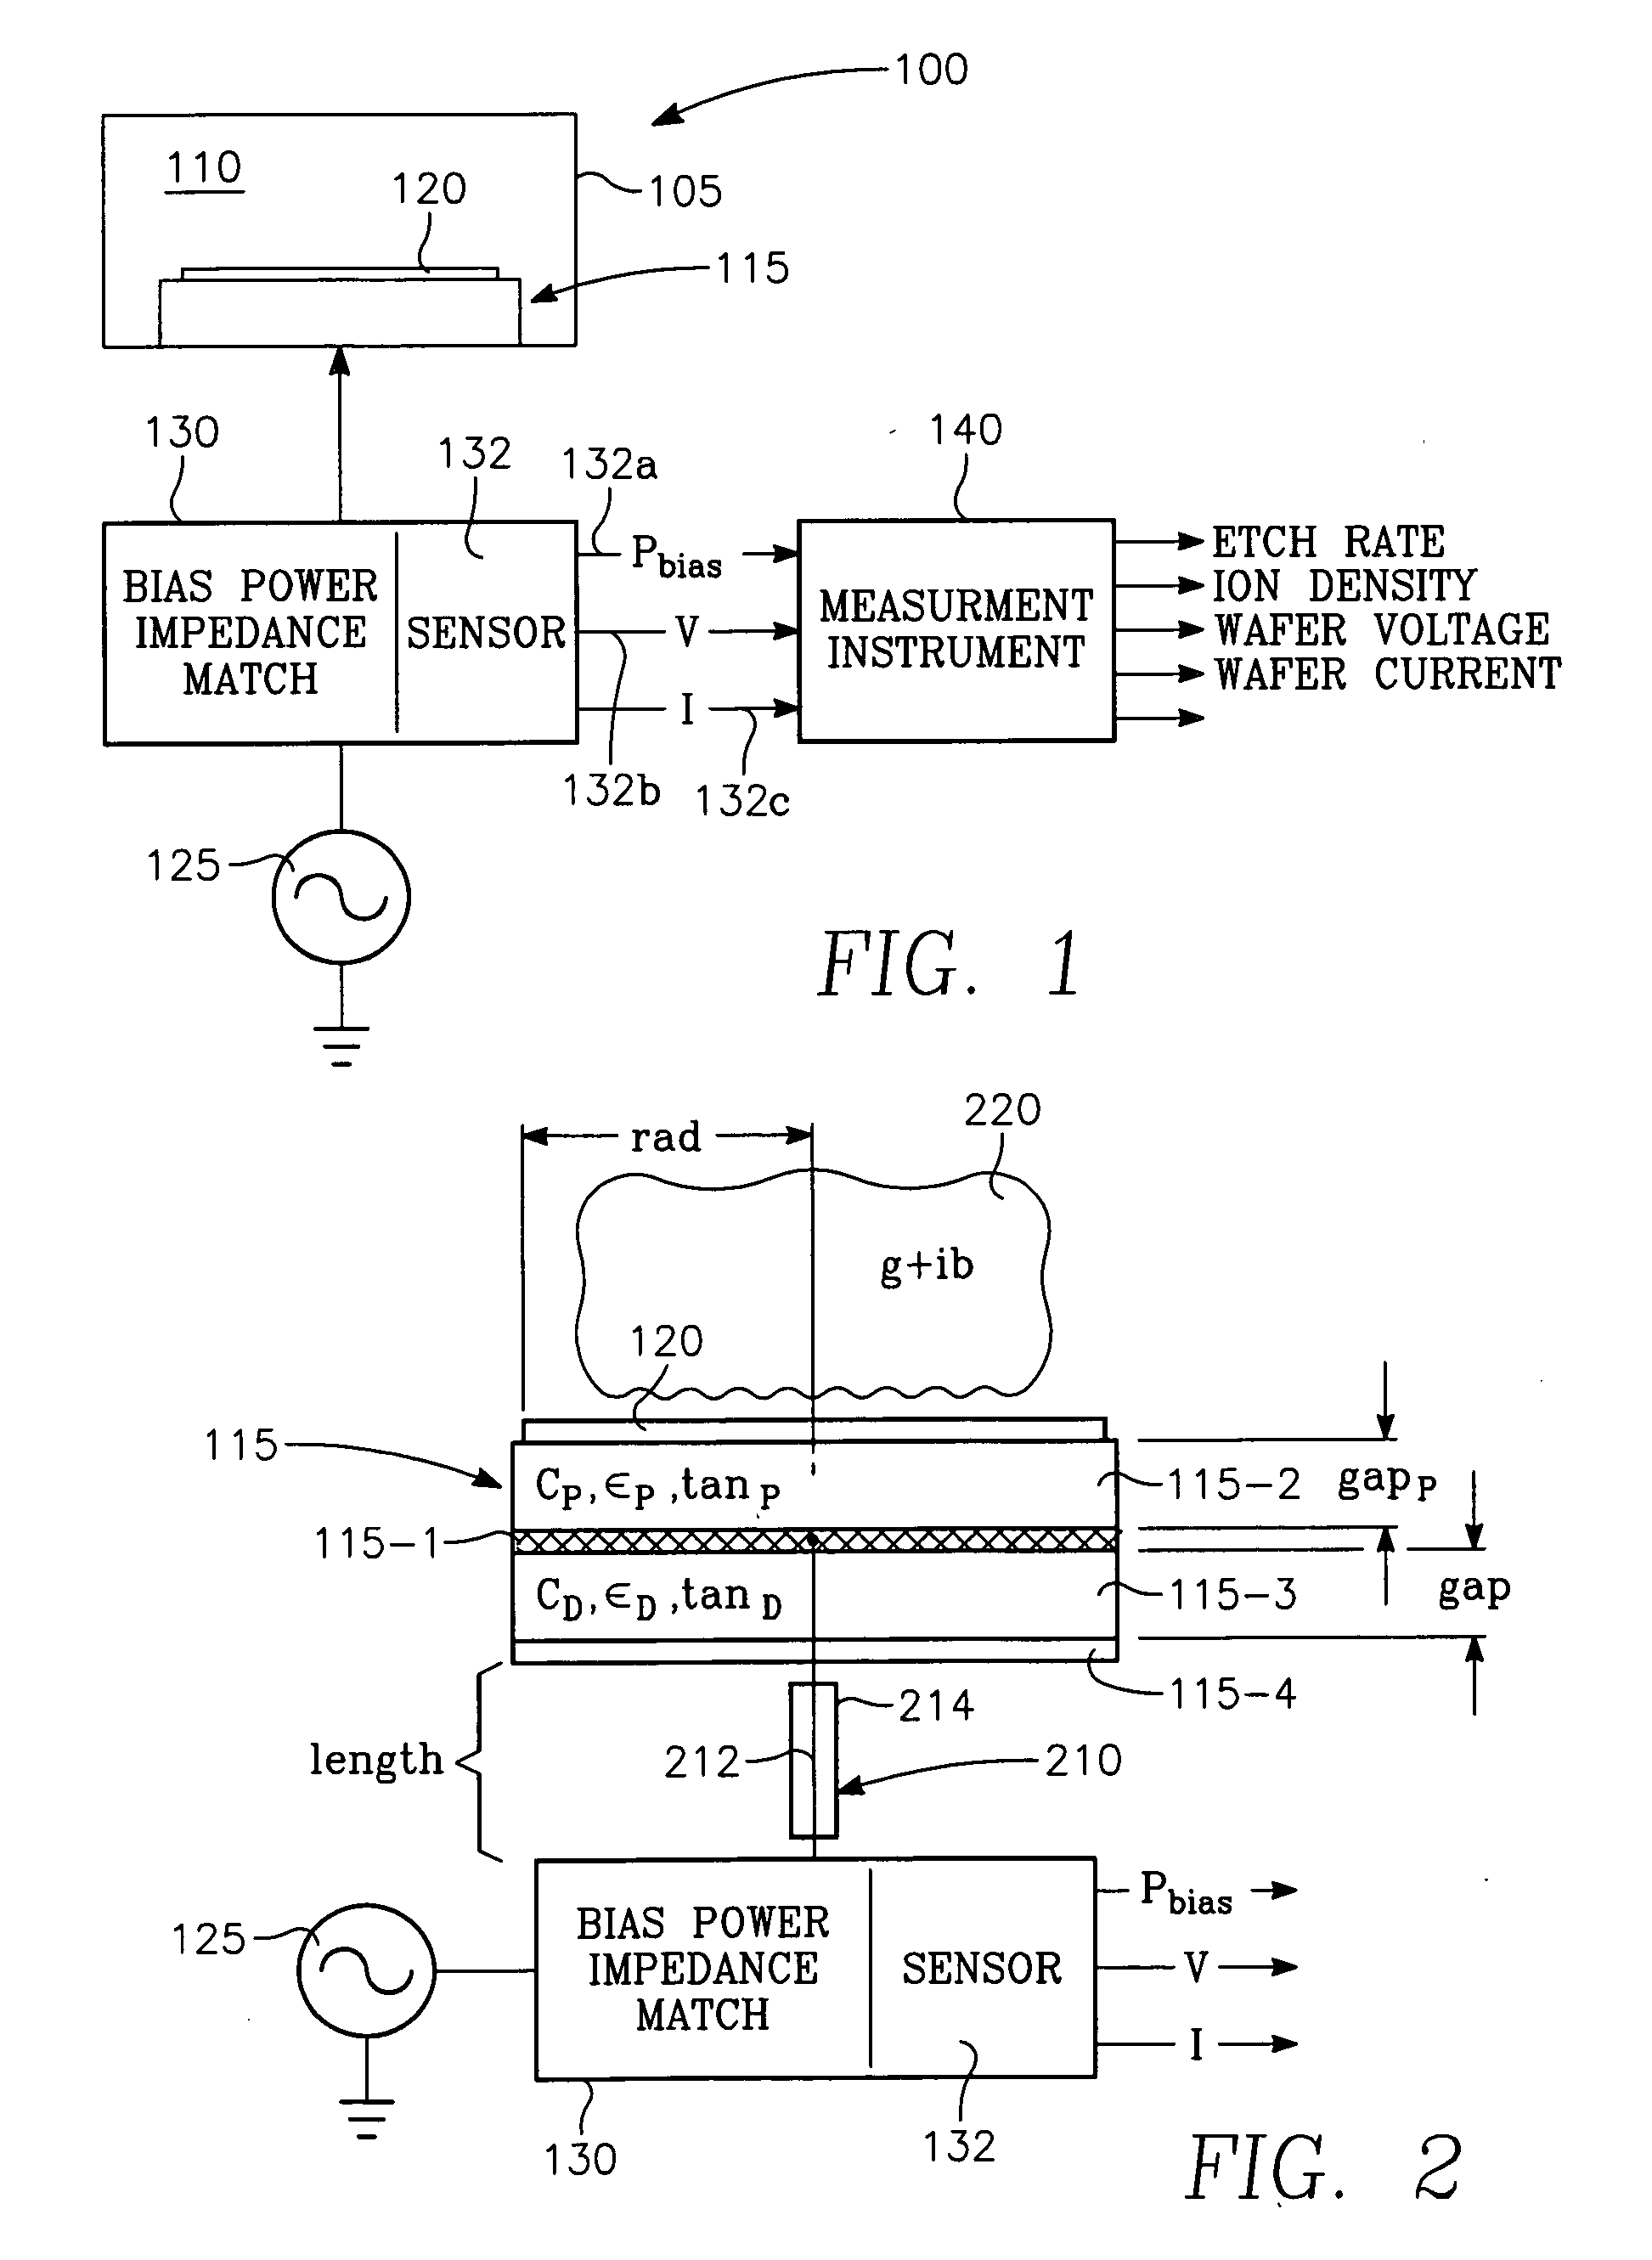 Method of determining plasma ion density, wafer voltage, etch rate and wafer current from applied bias voltage and current